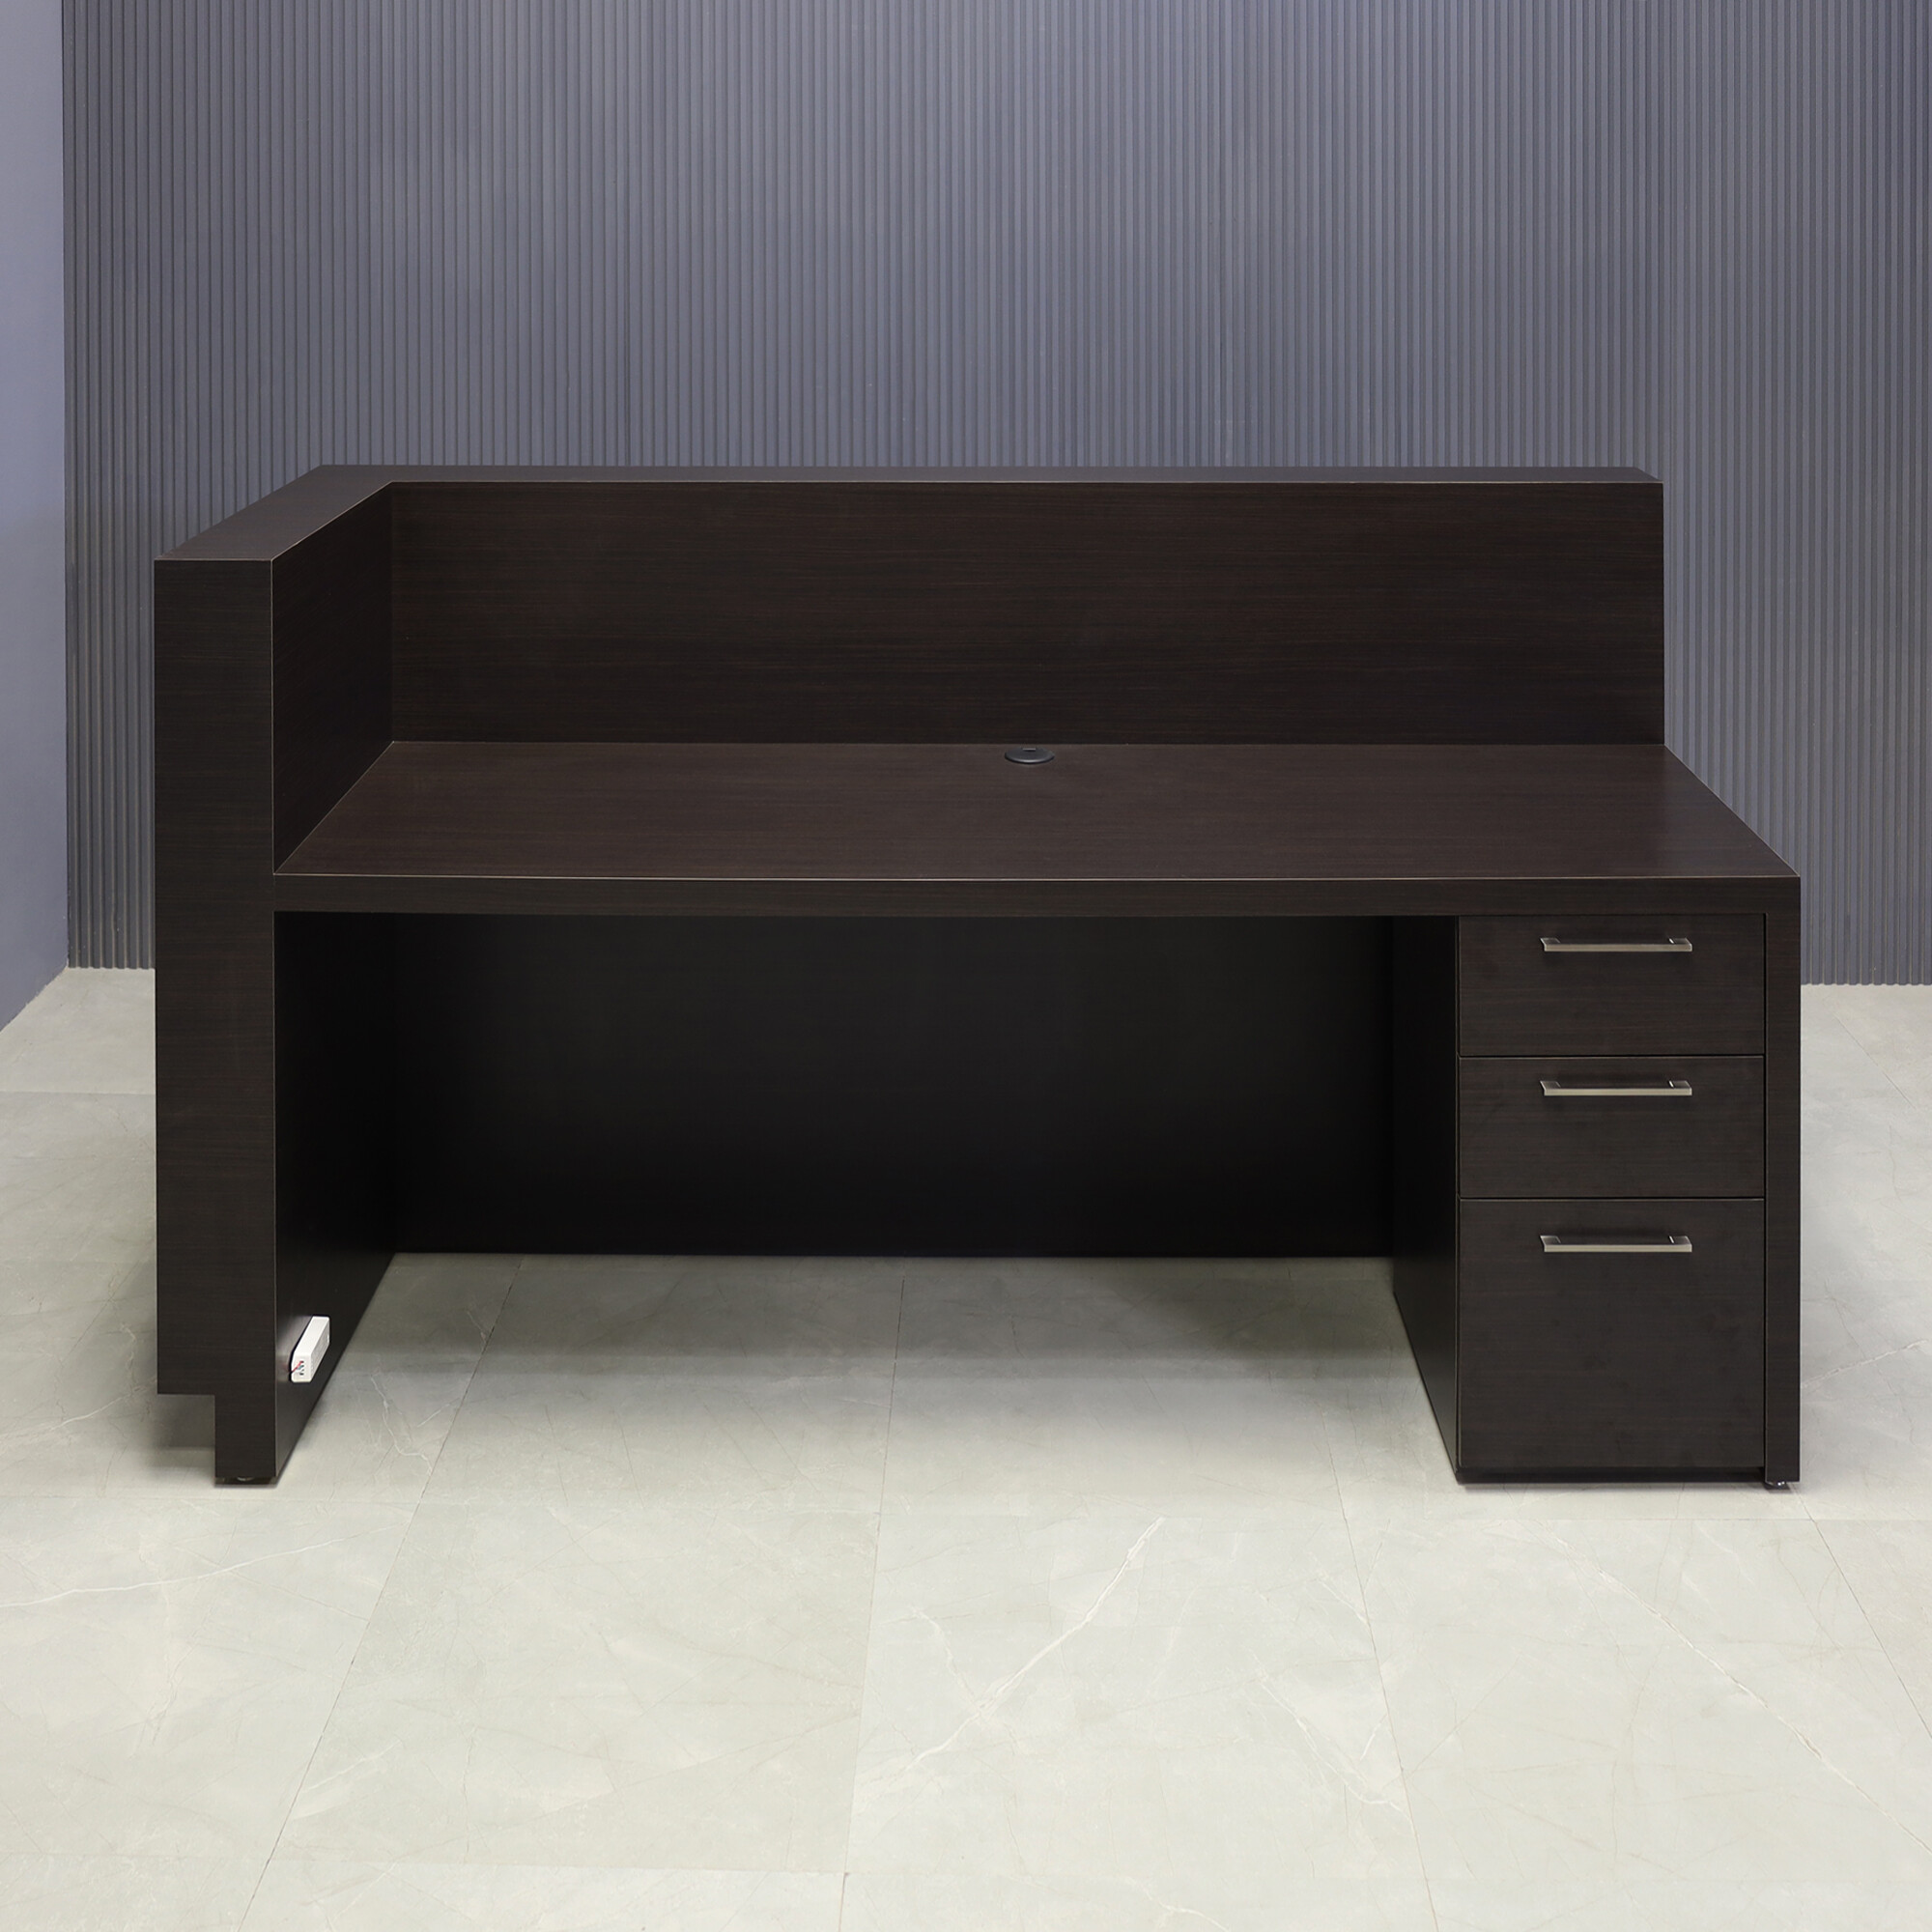 72-inch Dallas L-Shape Custom Reception Desk, right side when facing front in ebony recon matte laminate main desk and gold aluminum toe-kick, with warm white LED, and built-in storage on right side when sitting, shown here.